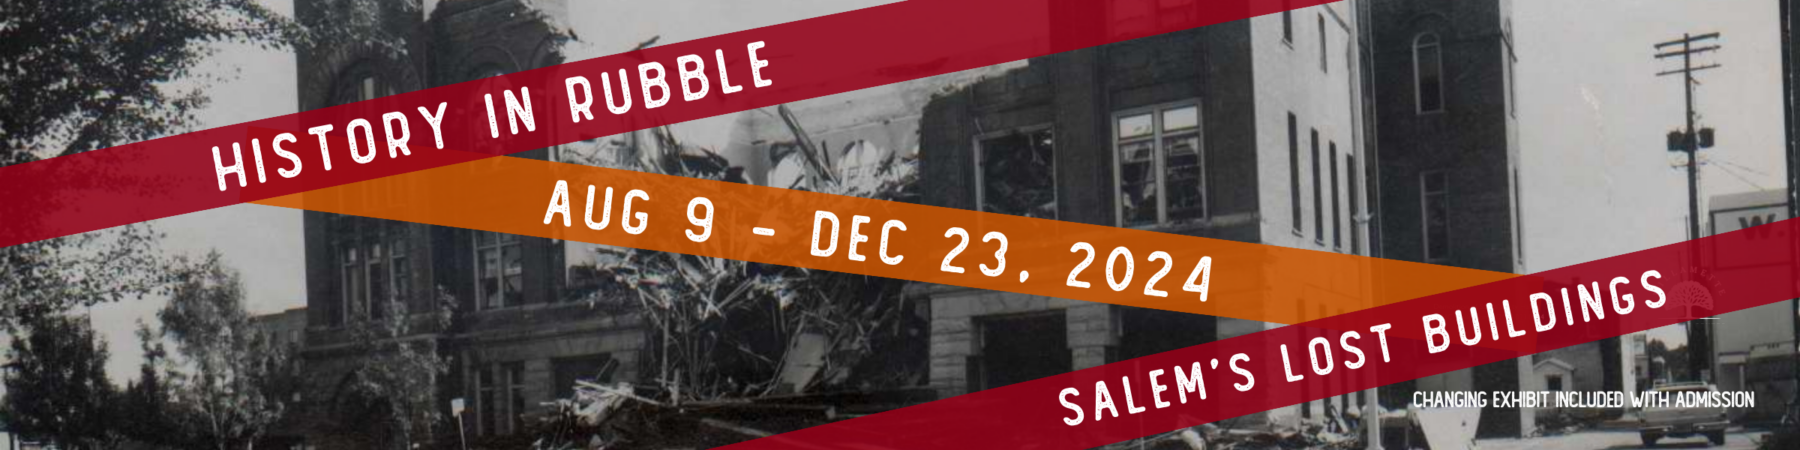 History in Rubble Aug 9 - Dec 23, 2024 Salem's Lost Buildings. Changing Exhibit included with admission